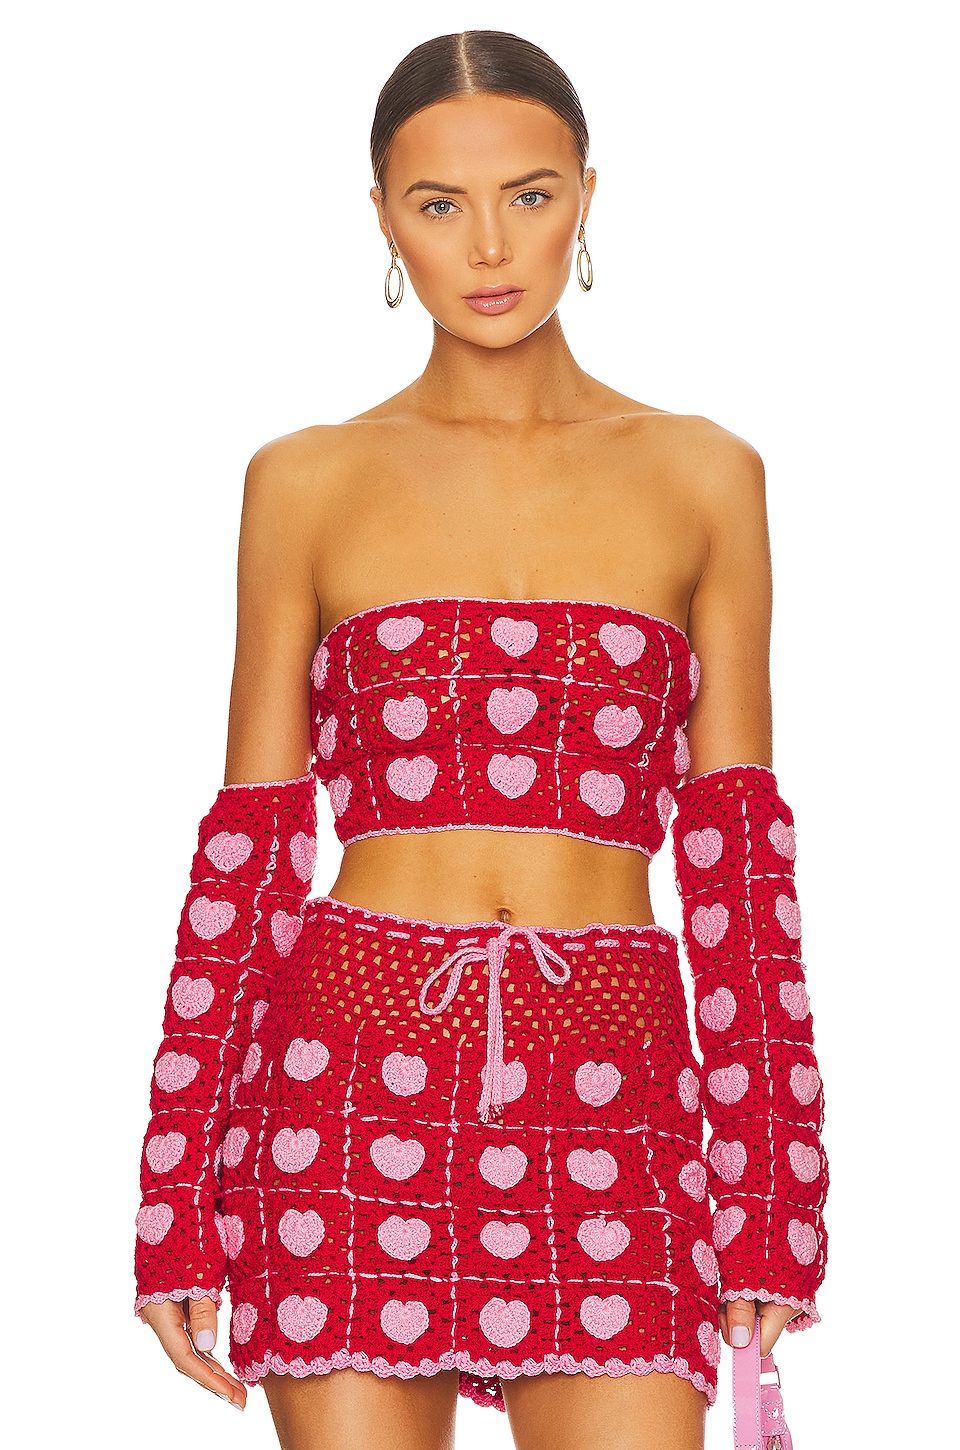 Bardot Brias Bustier in Fire Red